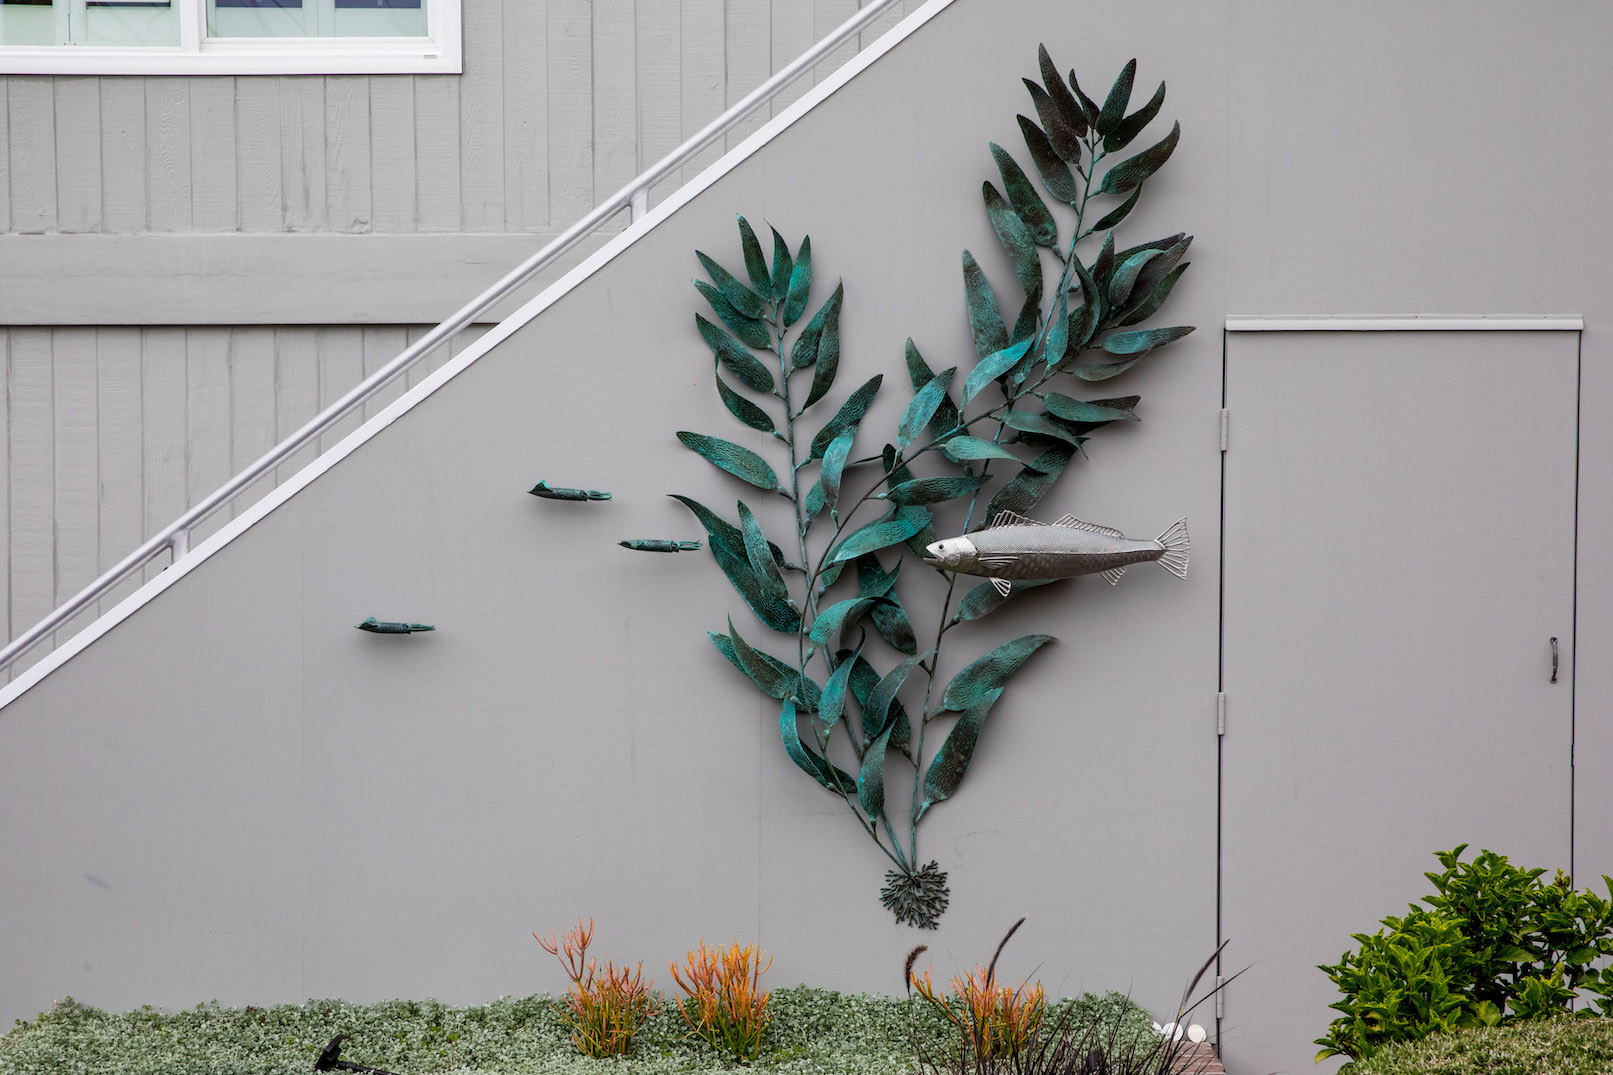 bronze kelp and stainless steel fish sculpture